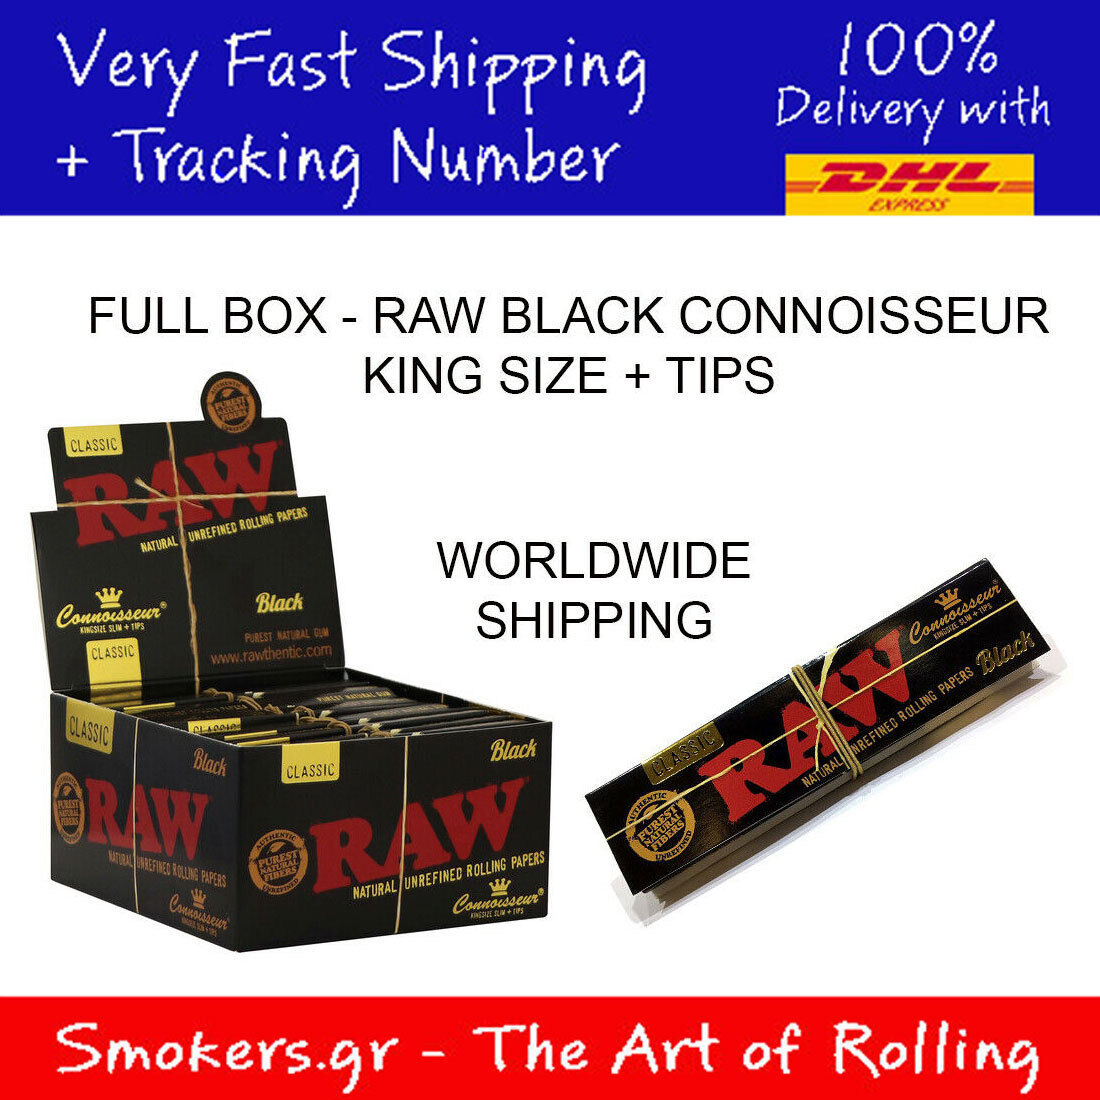 1x FULL BOX RAW BLACK Connoisseur King Size Slim + Tips (24 Booklets)